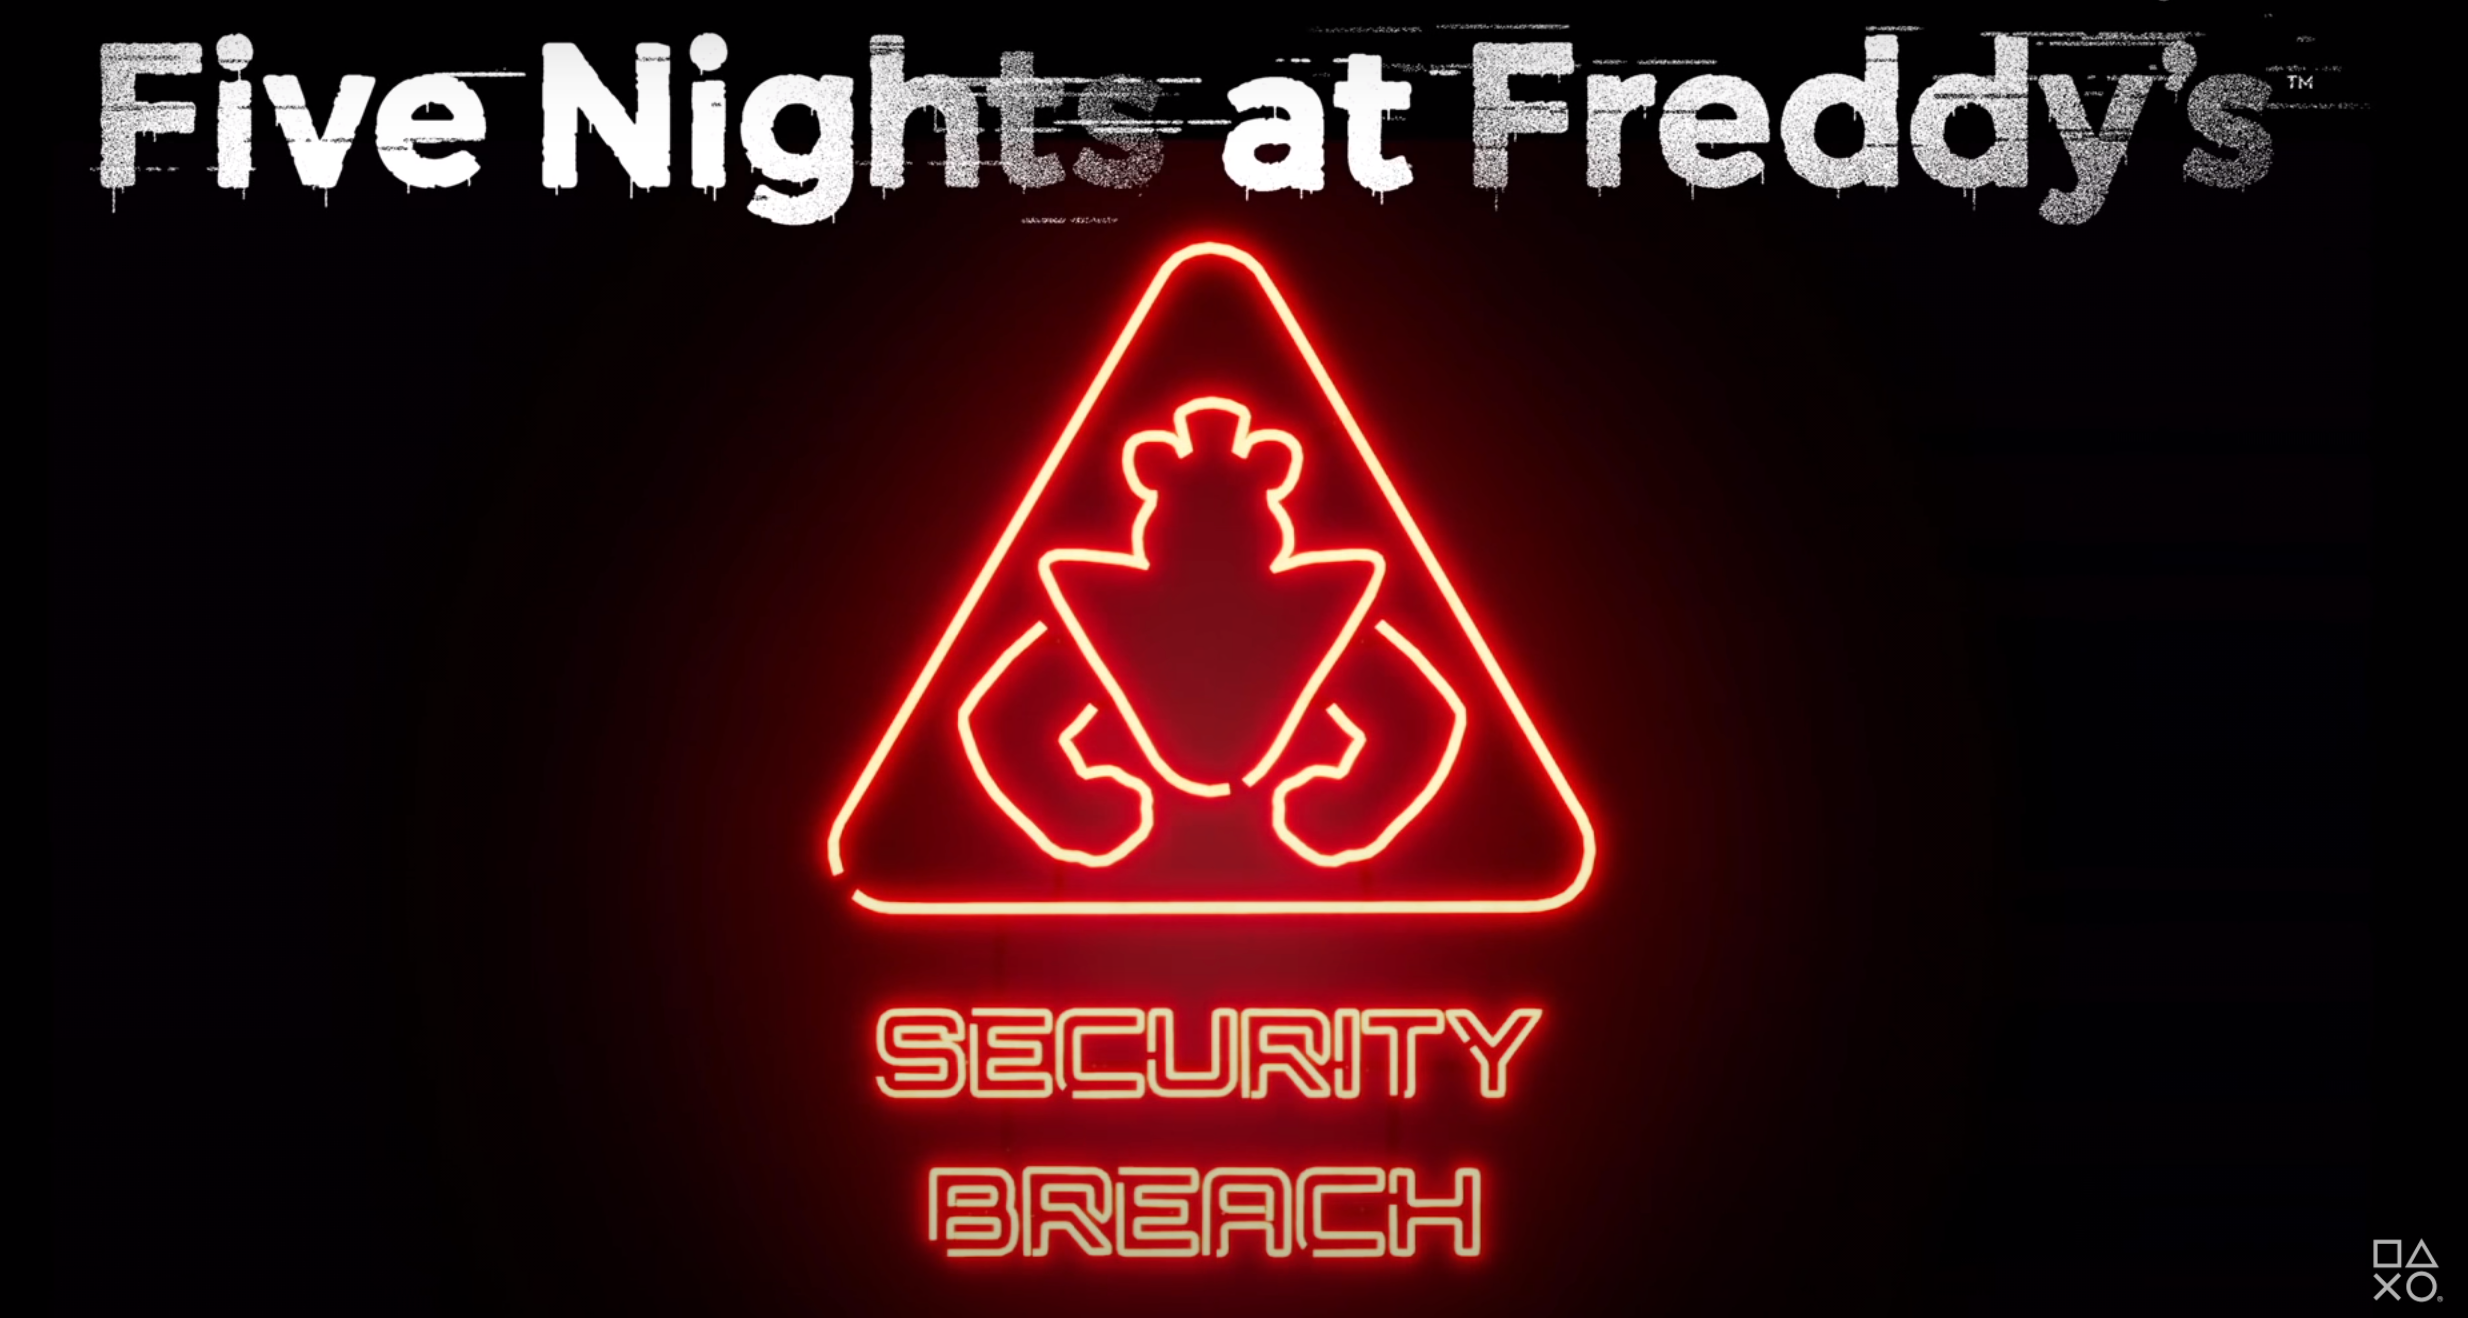 Five Nights At Freddy's: Security Breach